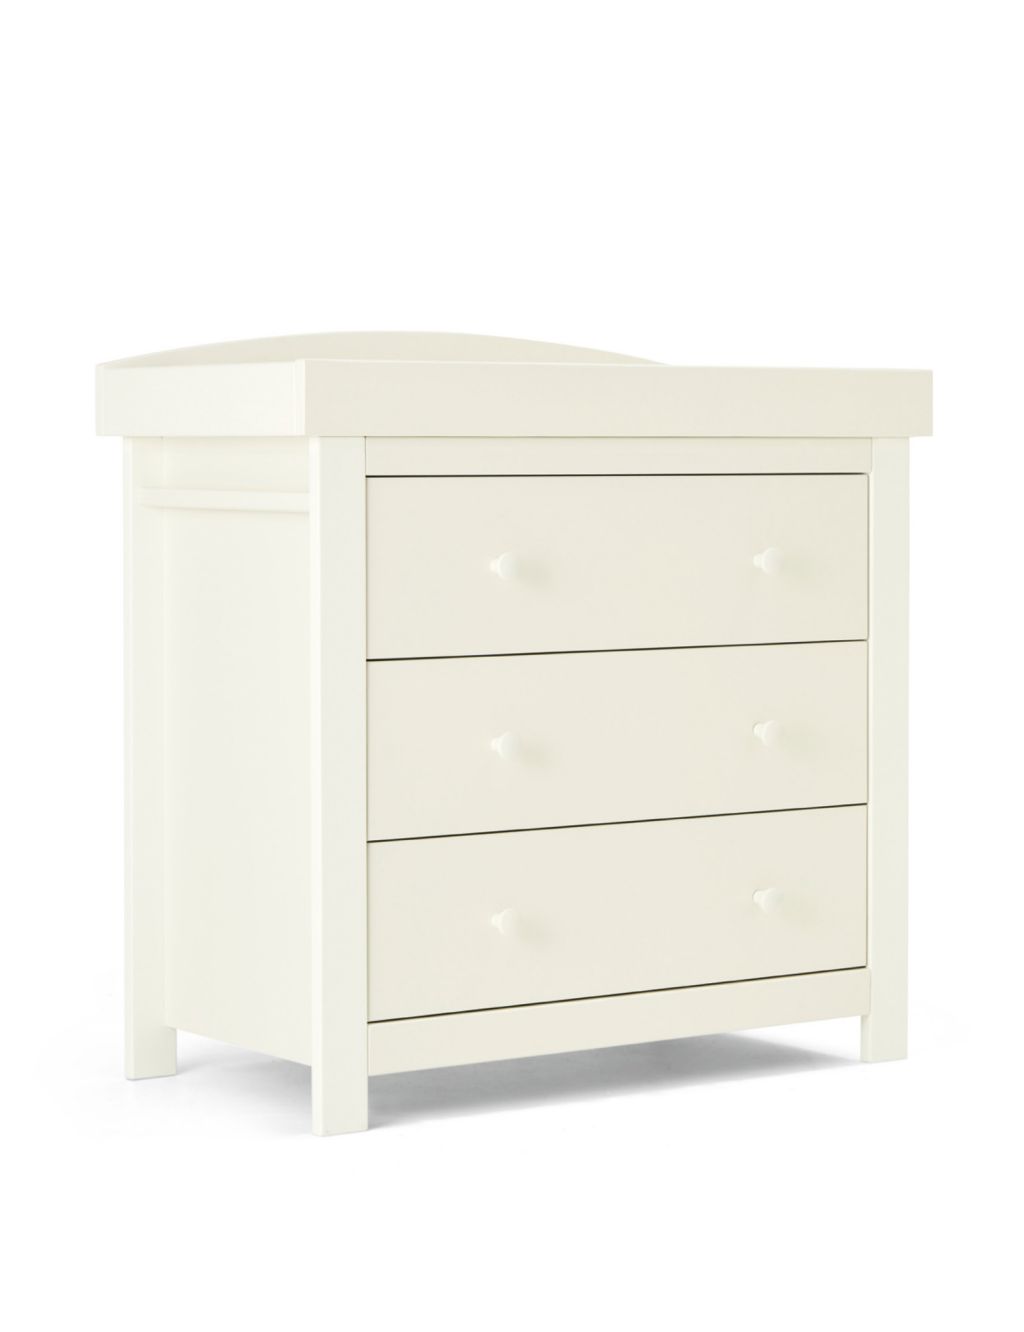 Mia 2 Piece Cotbed Set with Dresser image 7